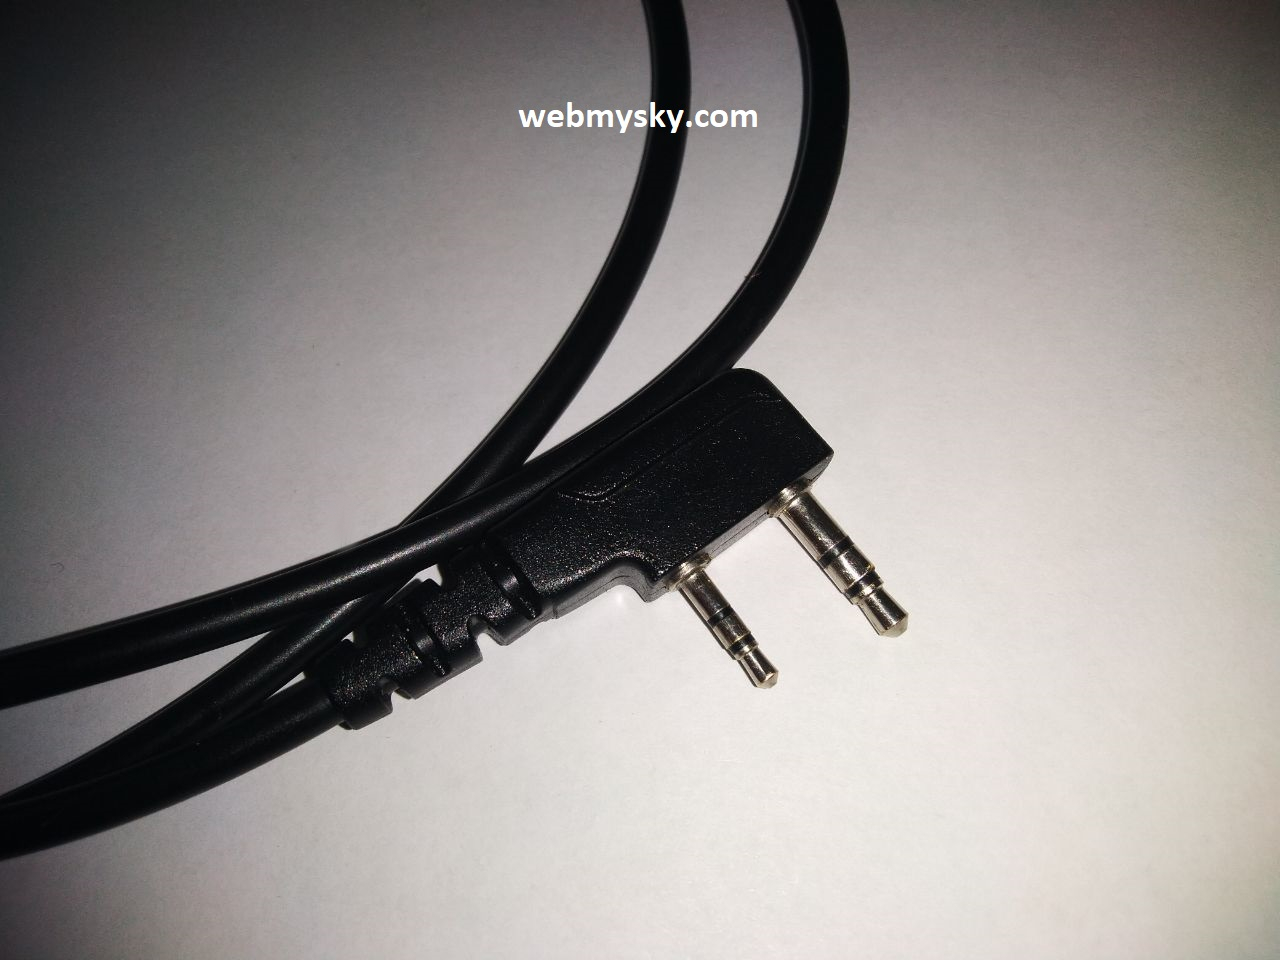 USB Cable for Firmware Updates and Programming of Retevis Radios